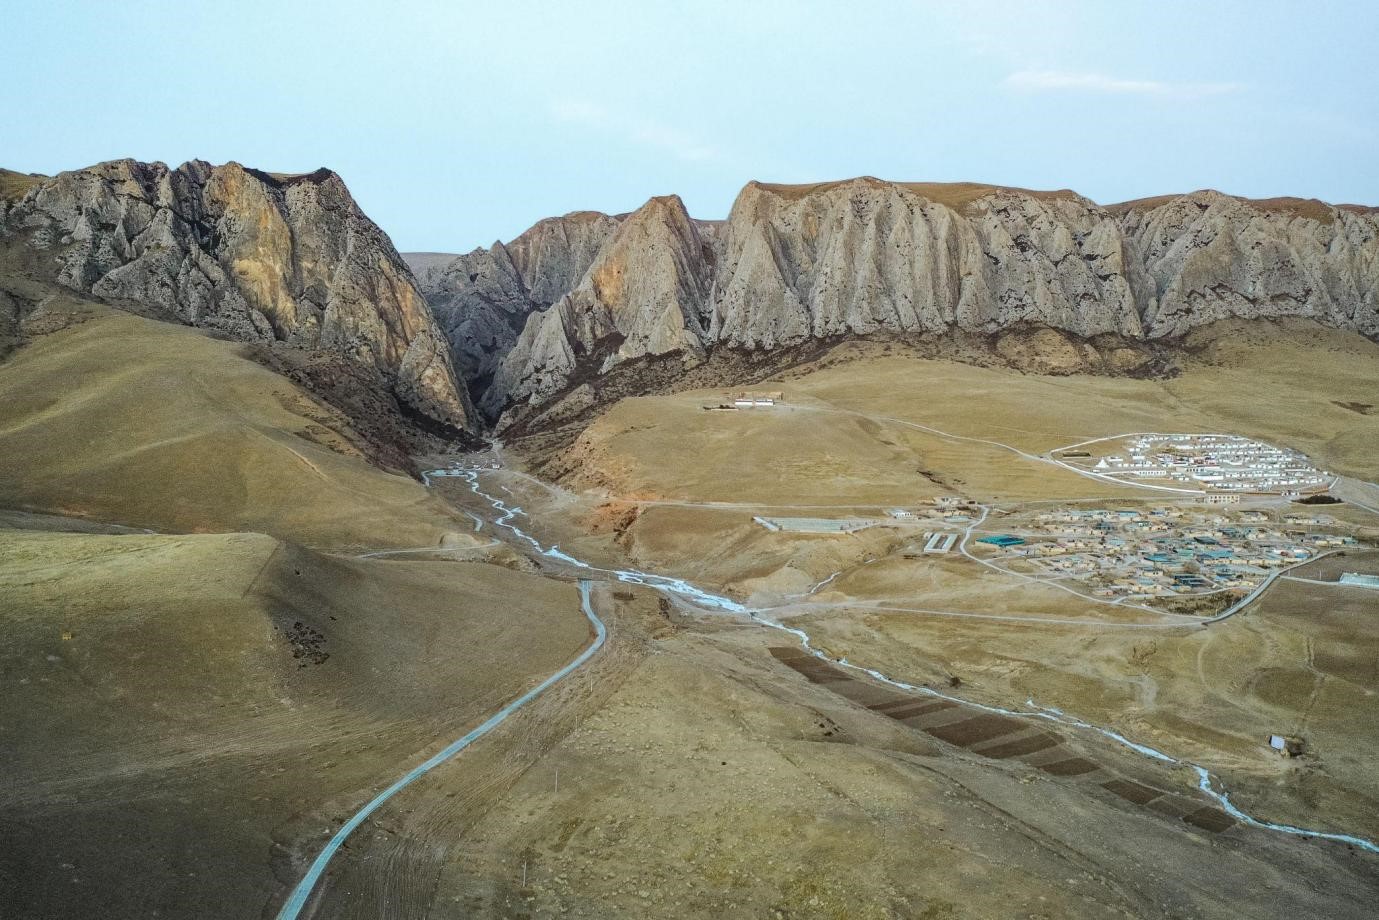 View of the Ganjia Basin where Baishiya Karst Cave is located. (Image by ZHANG Dongju’s group from Lanzhou University)